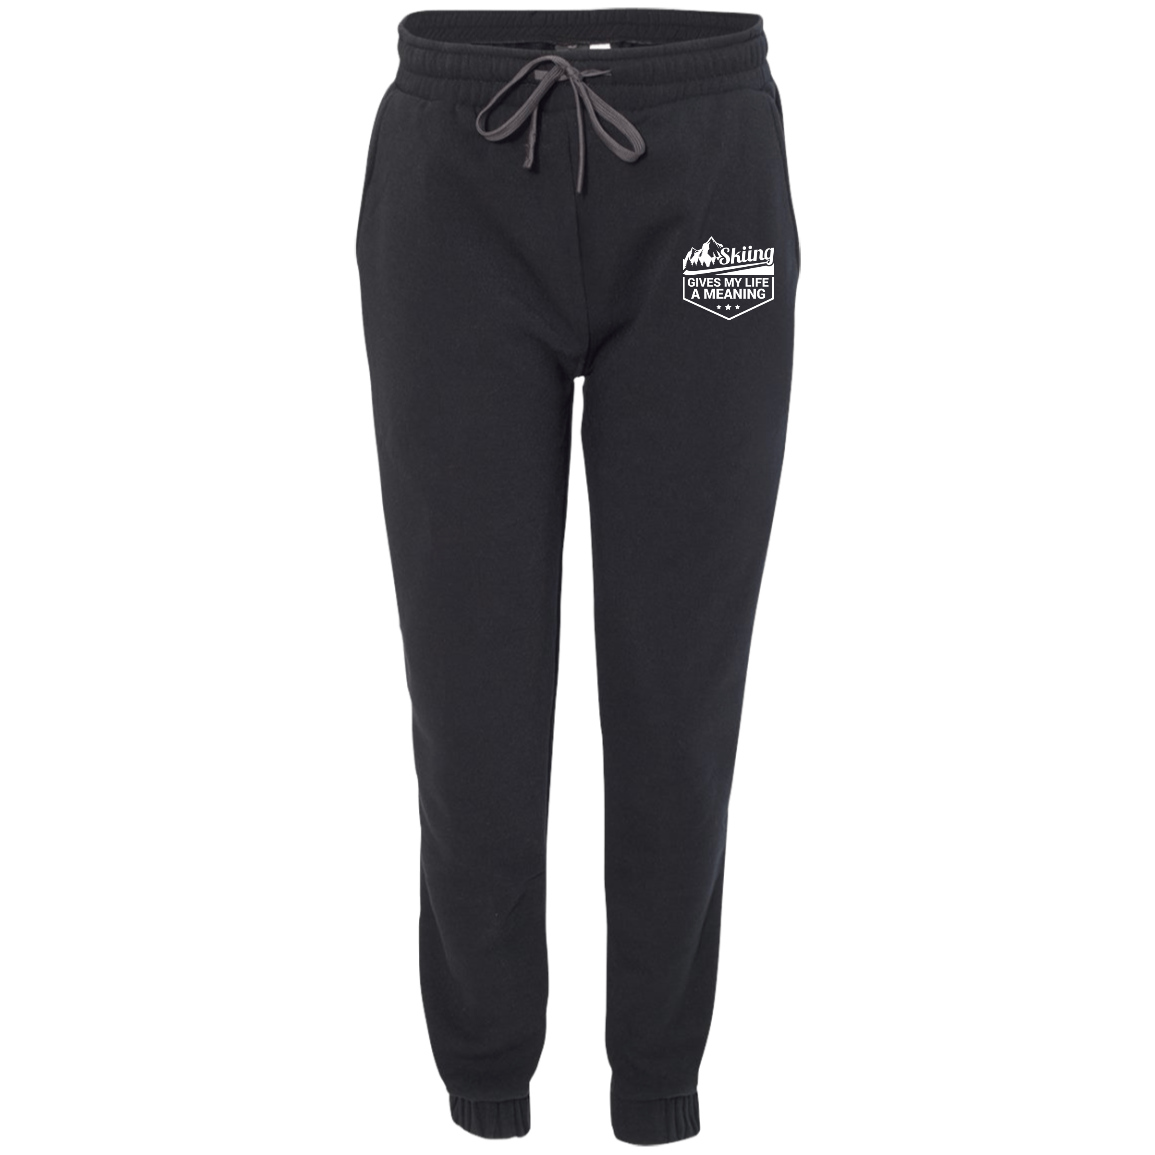 Skiing Gives My Life A Meaning Men's Adult Fleece Joggers - Powderaddicts